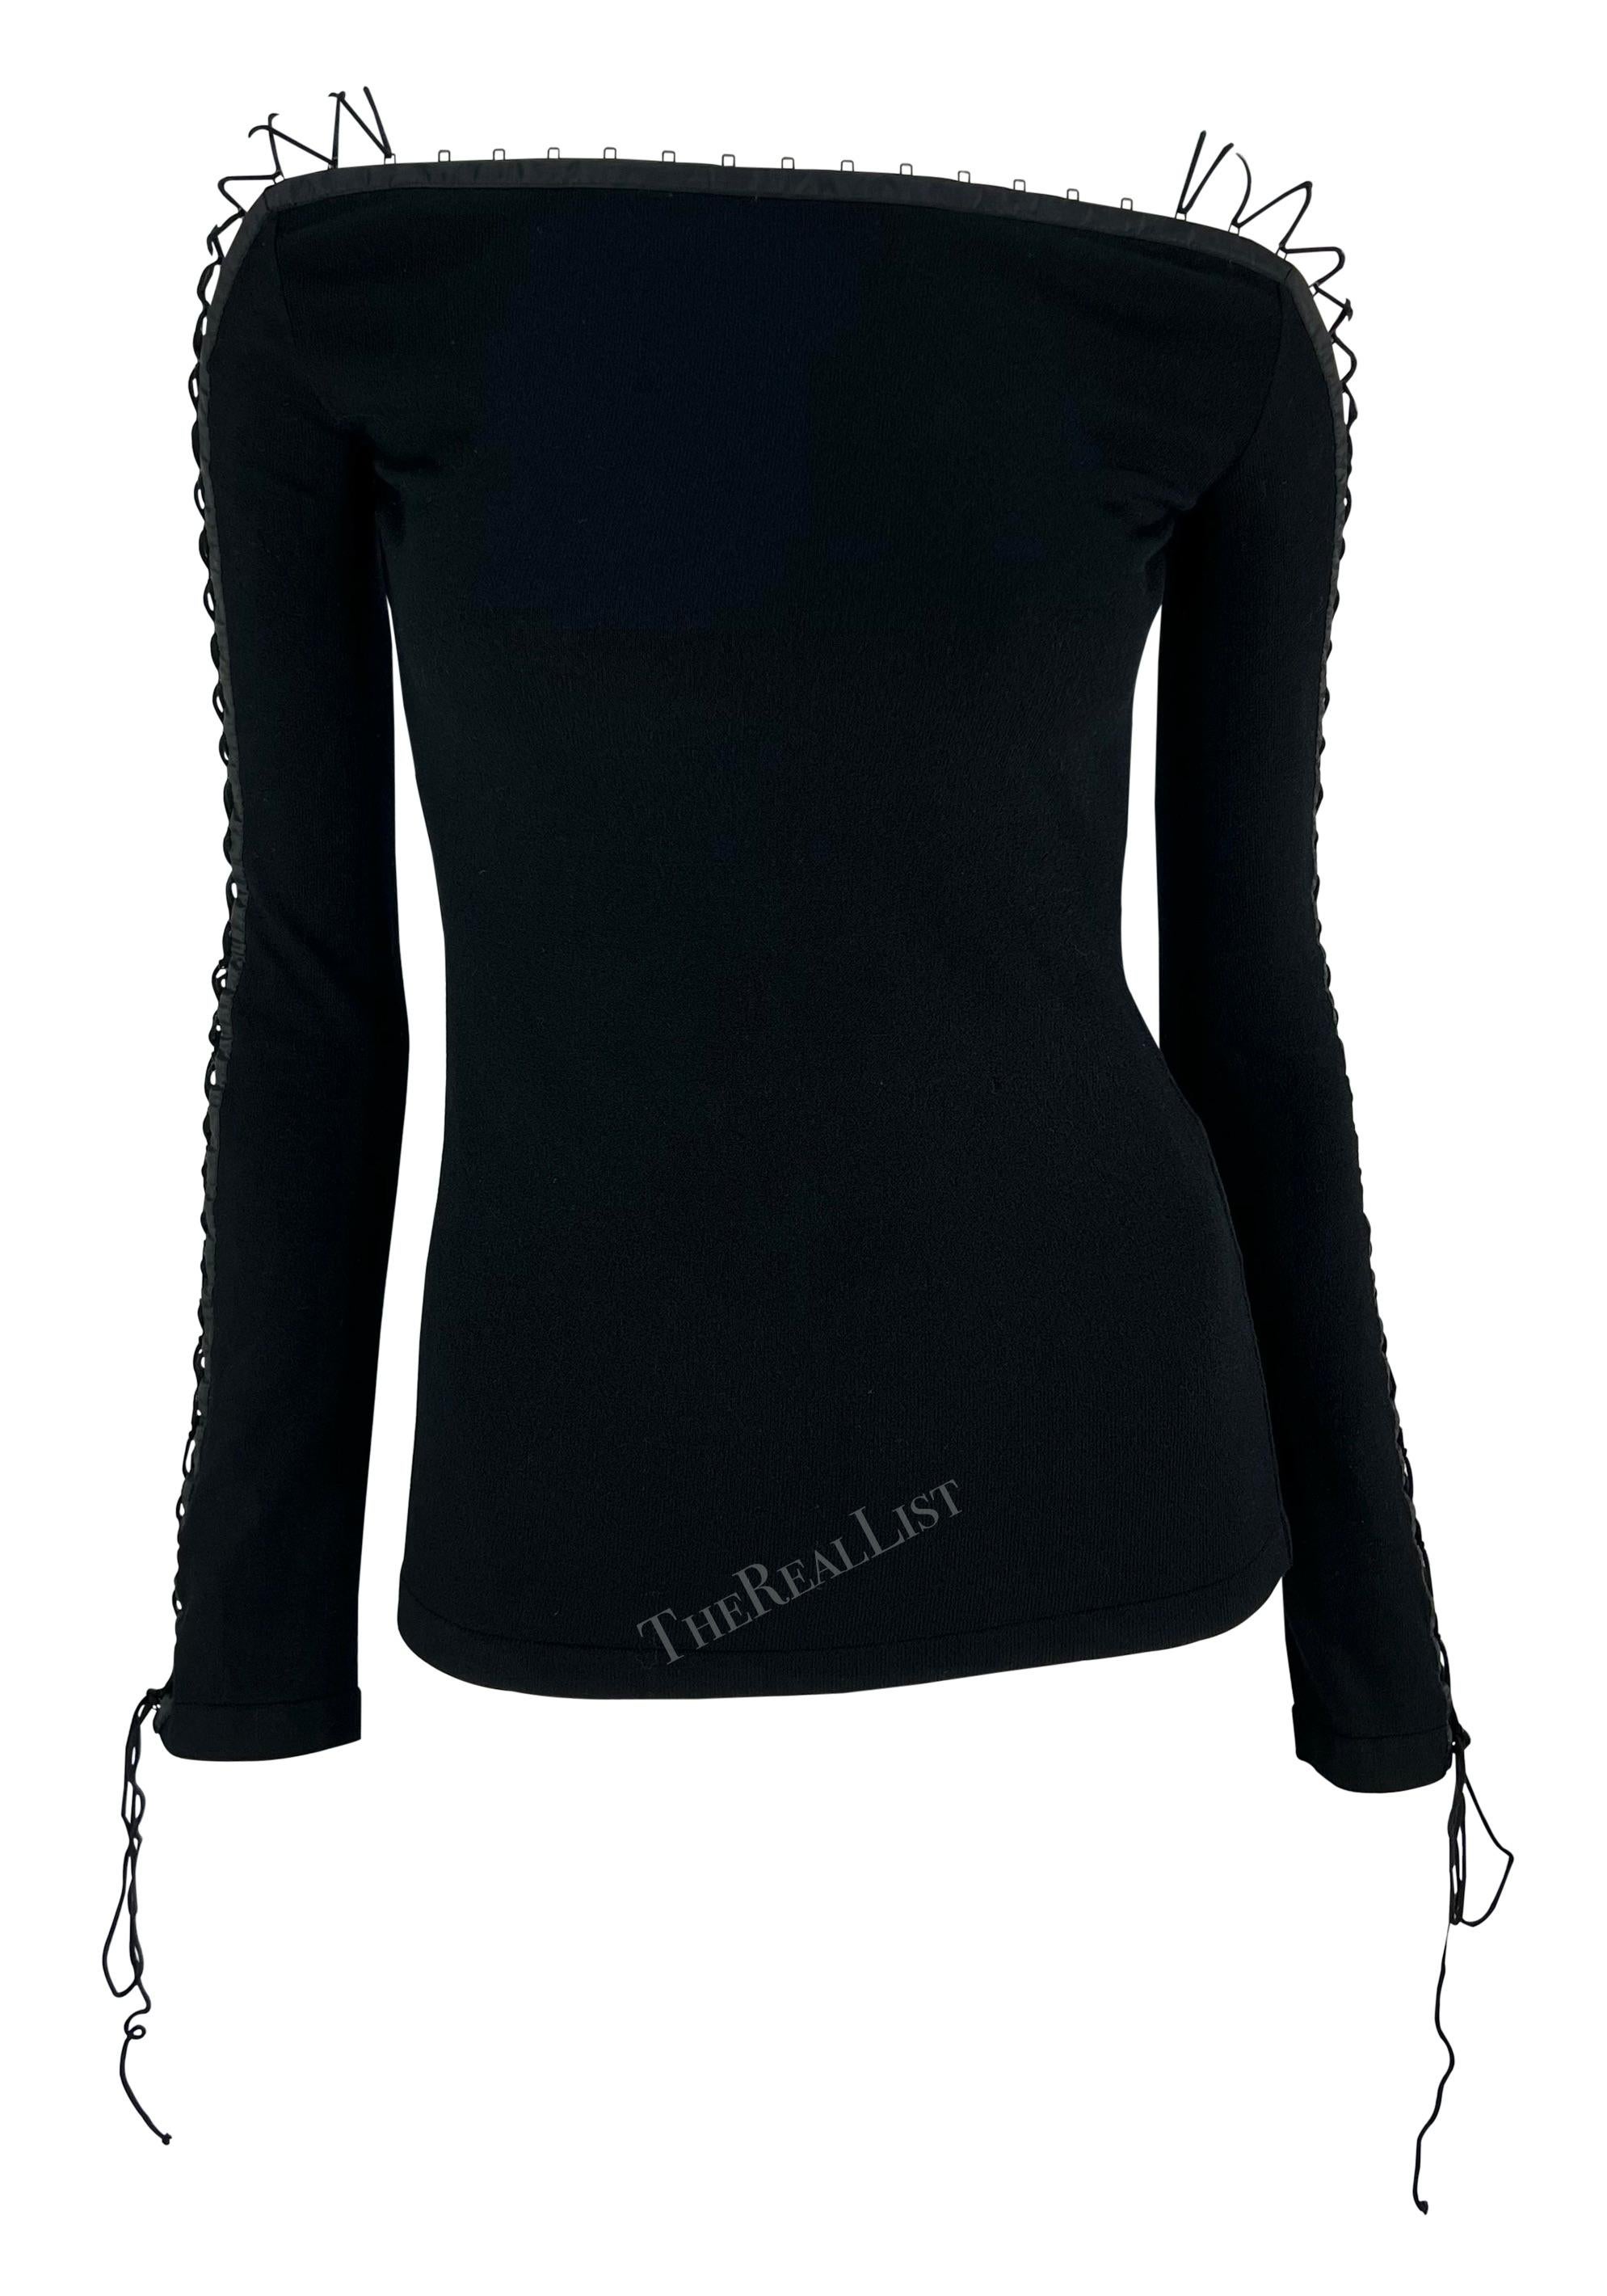 From the early 2000s, this fabulous black knit Dolce & Gabbana lace sweater is elevated with a lace-up detail that runs up both sleeves. This sultry sweater is made complete with a bateau neckline and cords that ties at the wrist. Add this chic